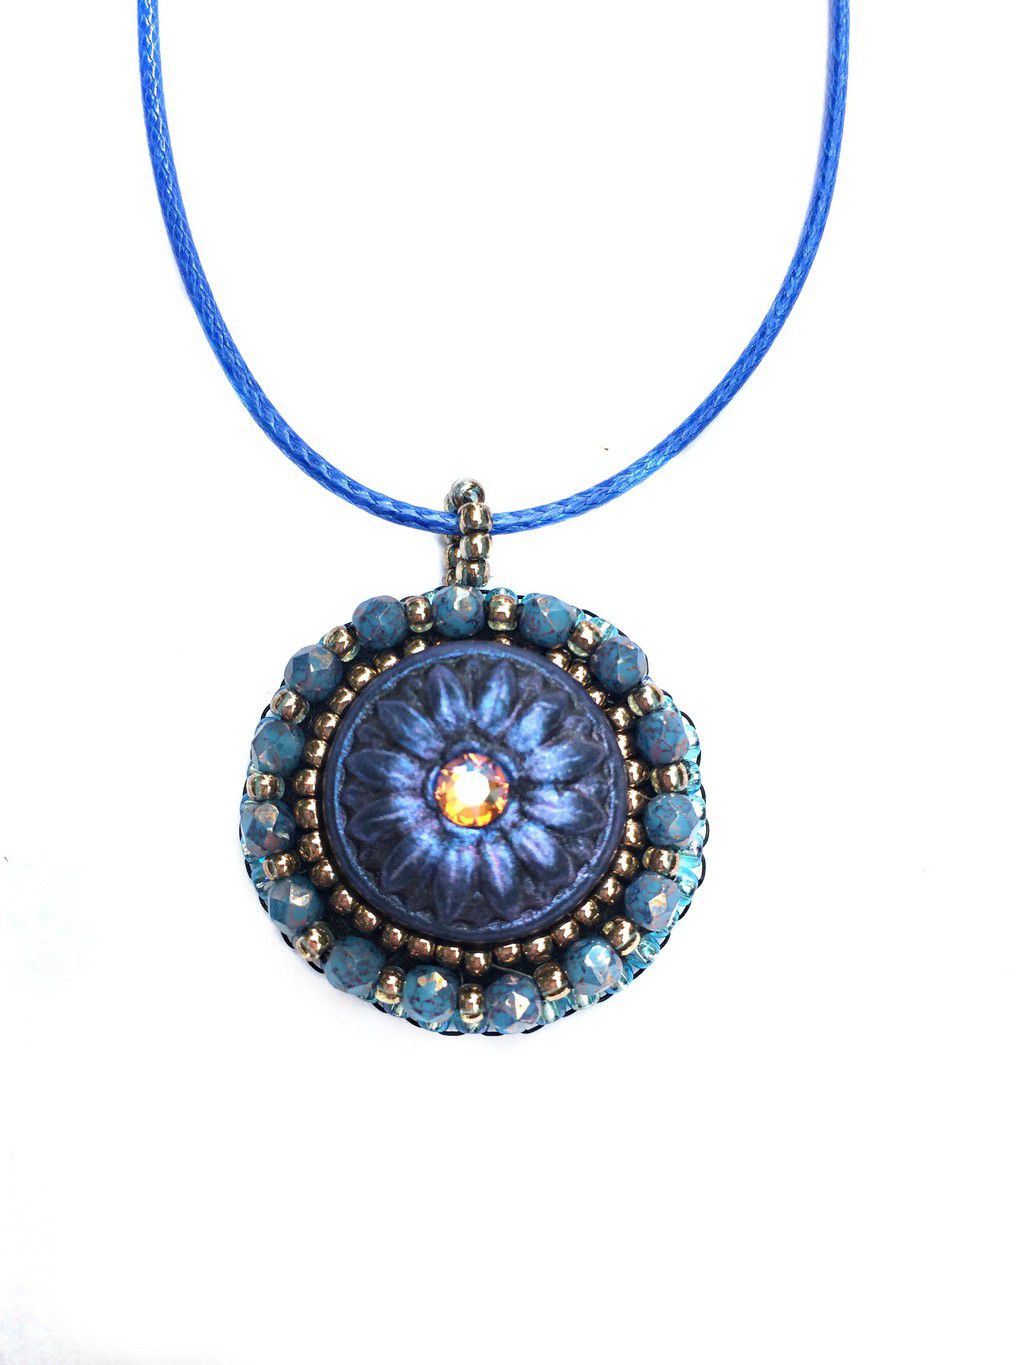 Tidy blue daisy pendant with yellow crystal center stone